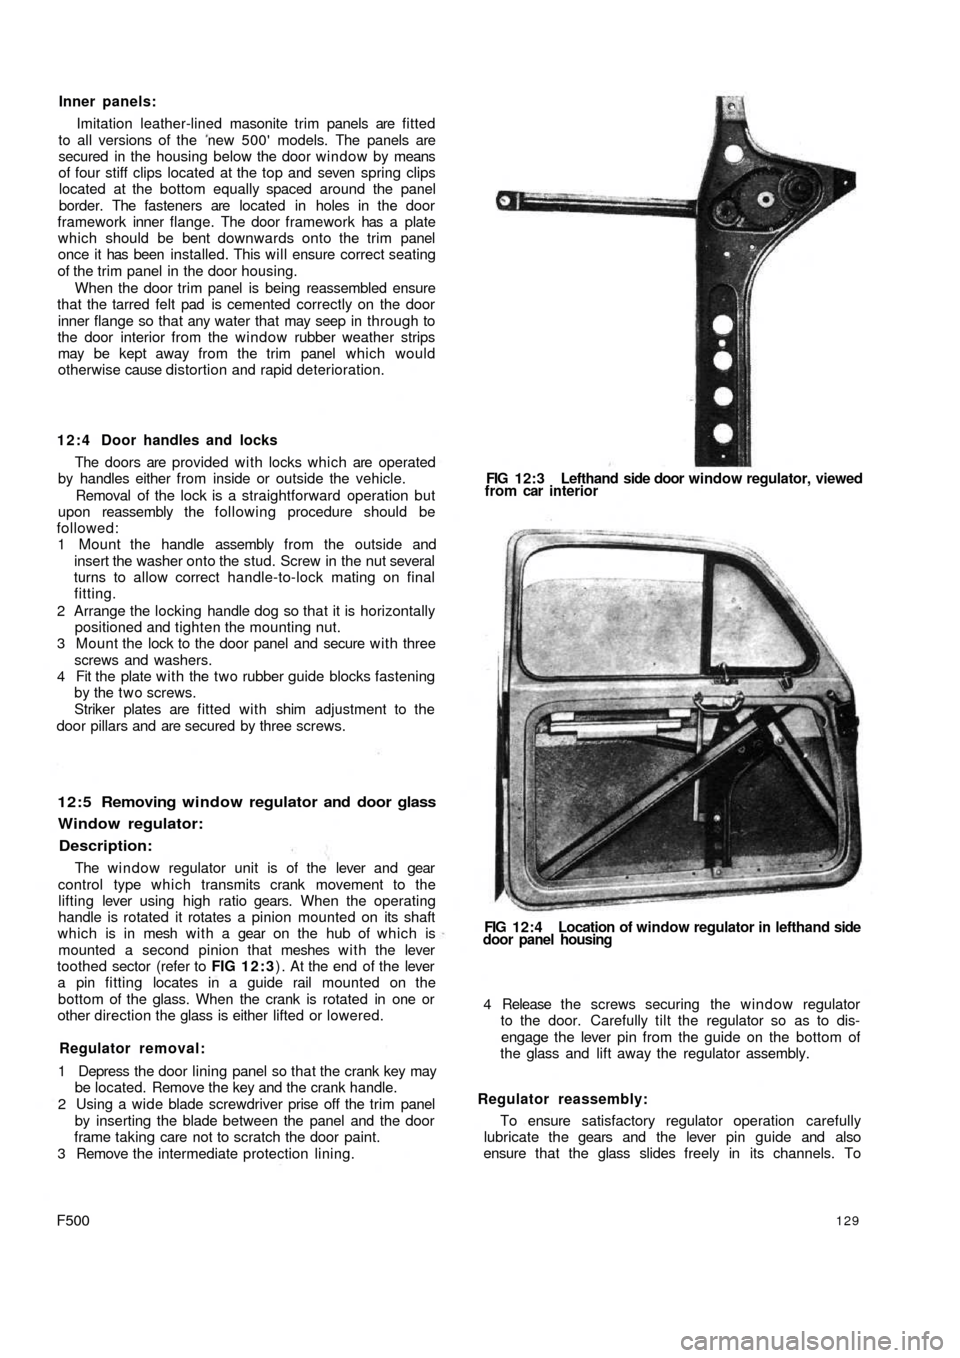 FIAT 500 1973 1.G Workshop Manual Inner panels:
Imitation leather-lined masonite trim panels are fitted
to all versions of the  new 500 models. The panels are
secured in the housing below the door window by means
of four stiff clips 